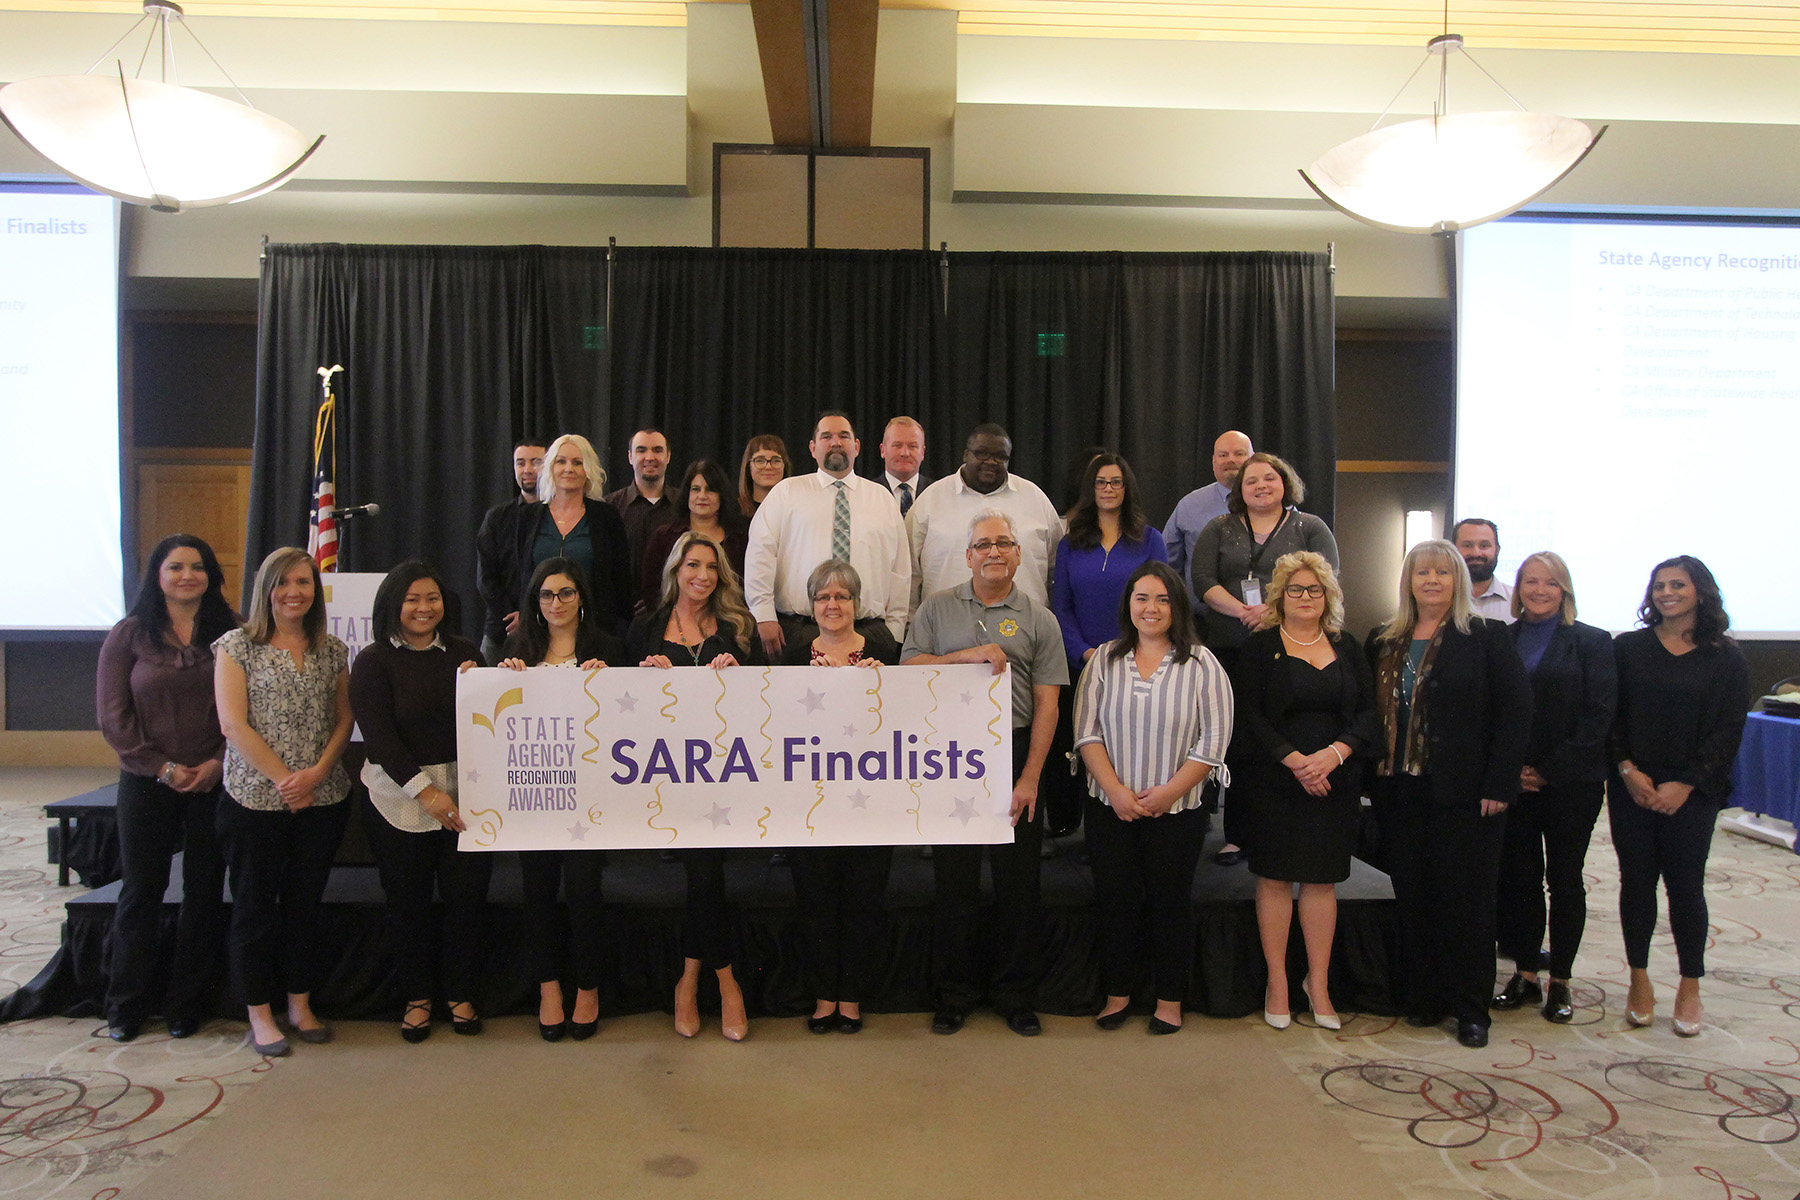 A photo of all the SARA finalists